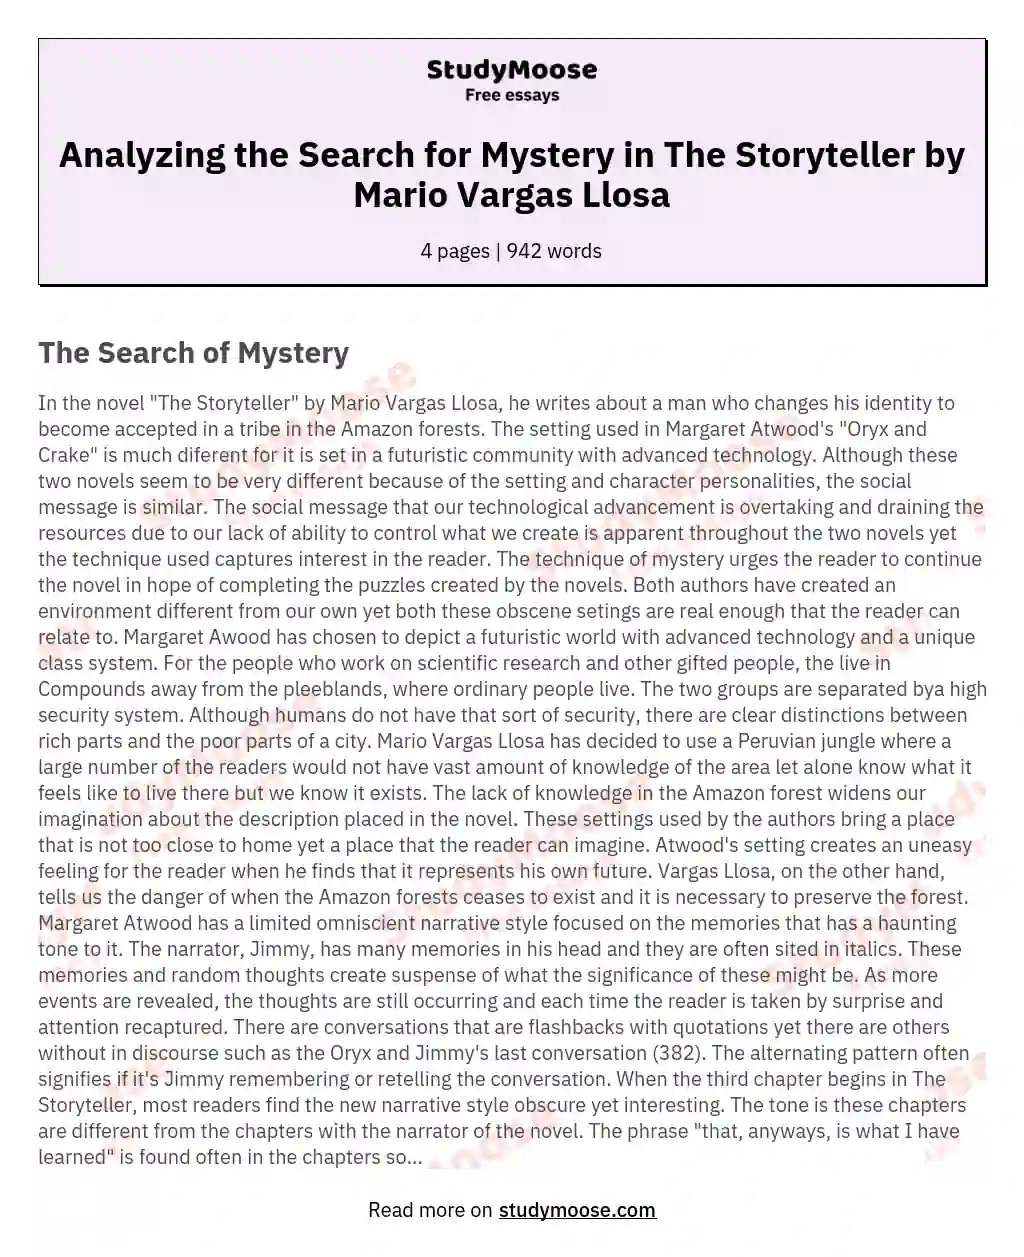 Analyzing the Search for Mystery in The Storyteller by Mario Vargas Llosa essay